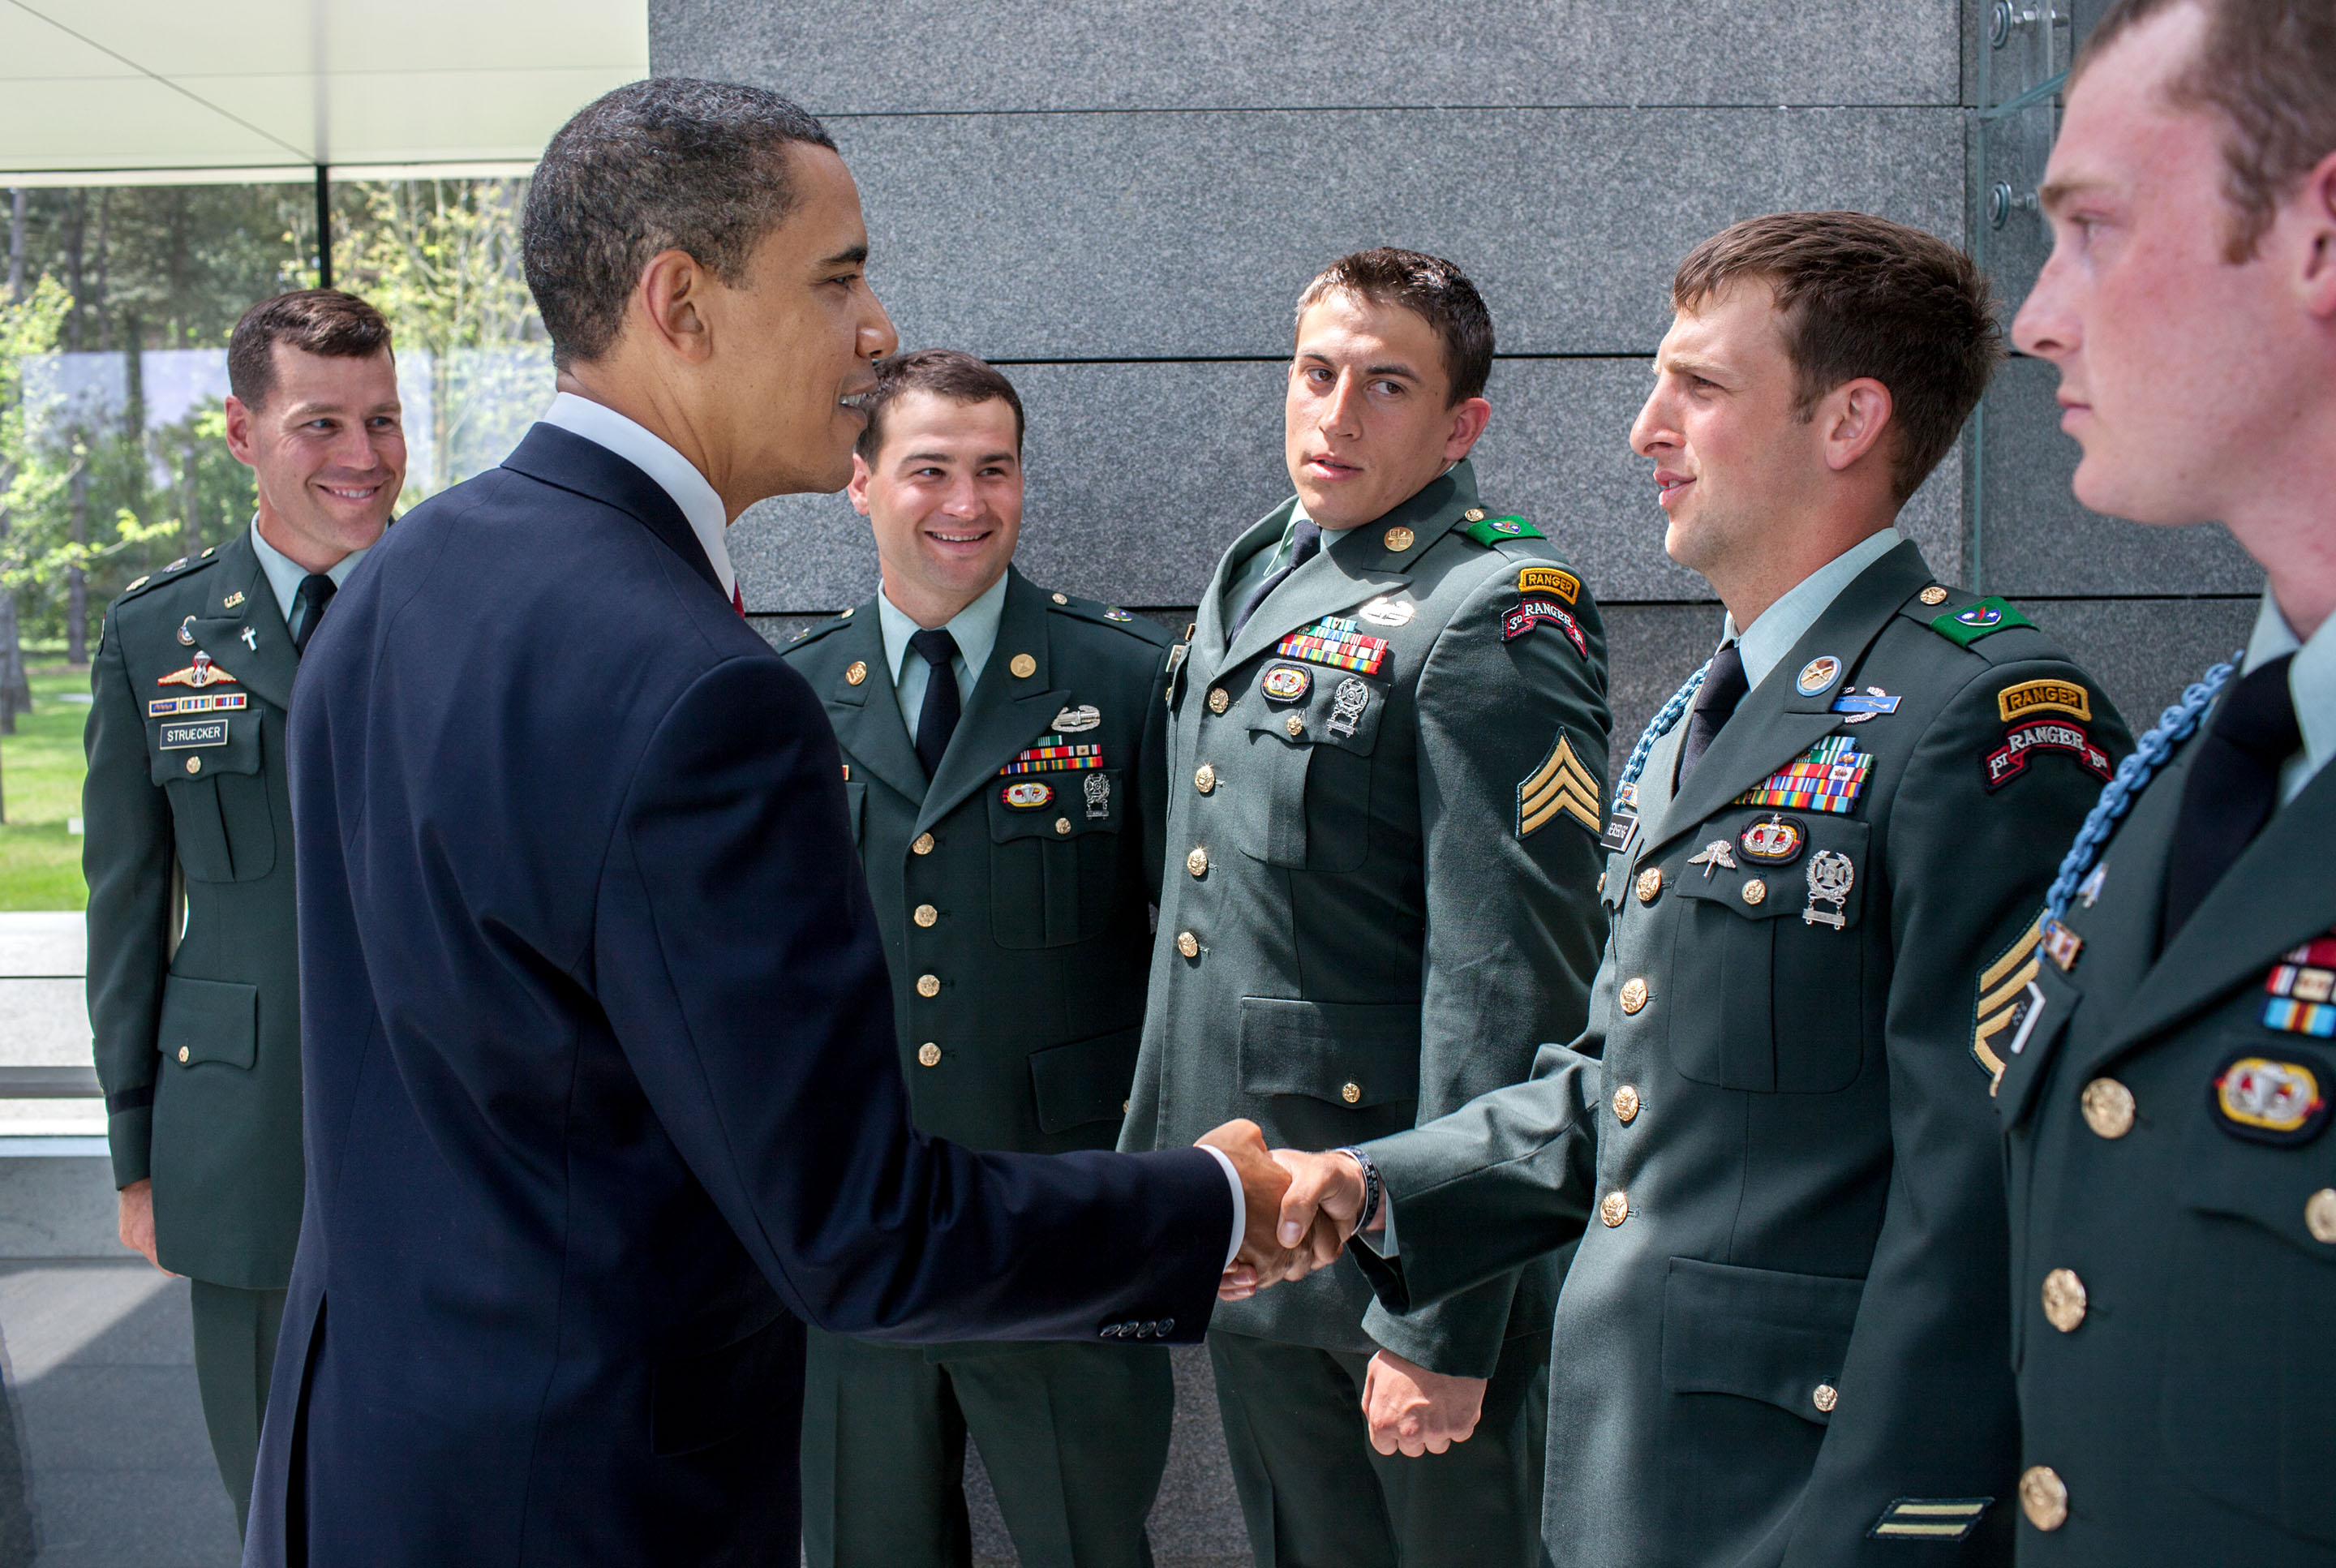 June 6, 2009: President Obama greets Cory Remsburg and other Army Rangers in Normandy. (Official White House Photo by Pete Souza)